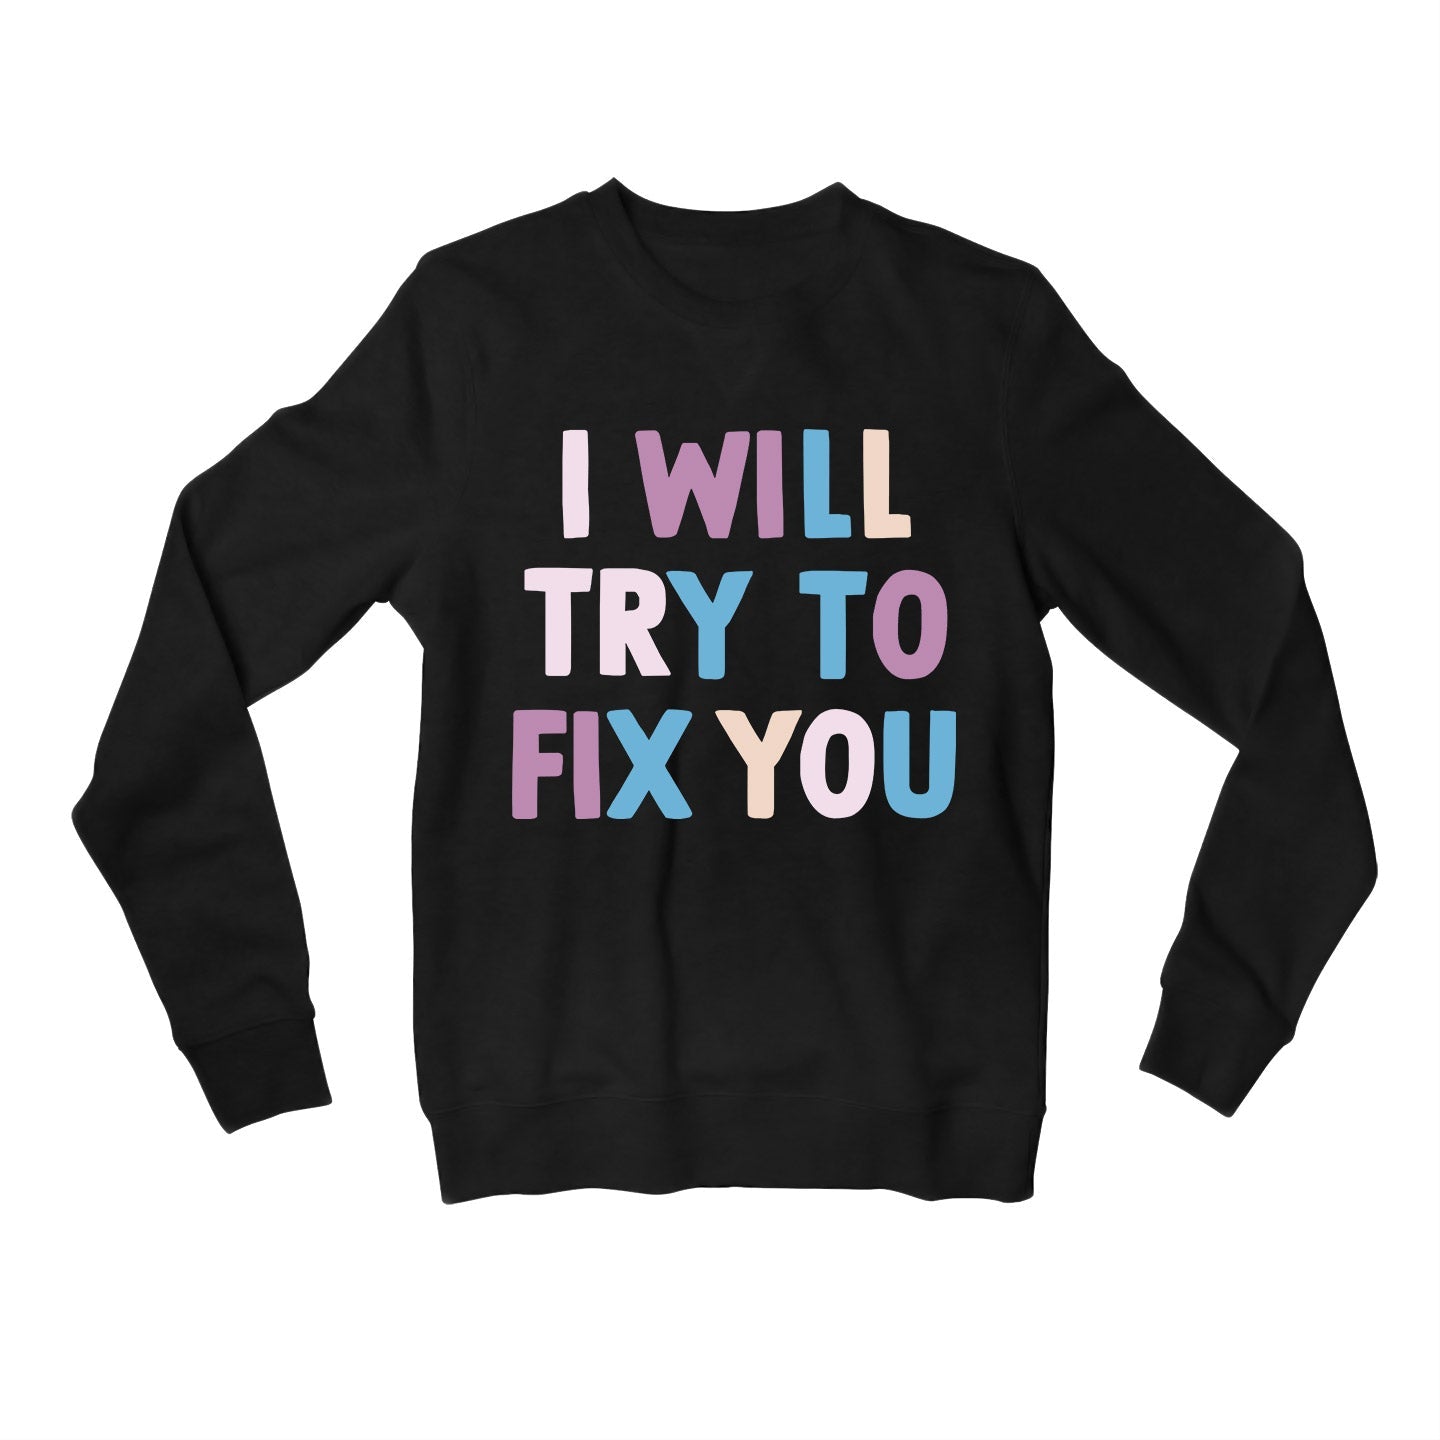 coldplay i will try to fix you sweatshirt upper winterwear music band buy online united states of america usa the banyan tee tbt men women girls boys unisex black